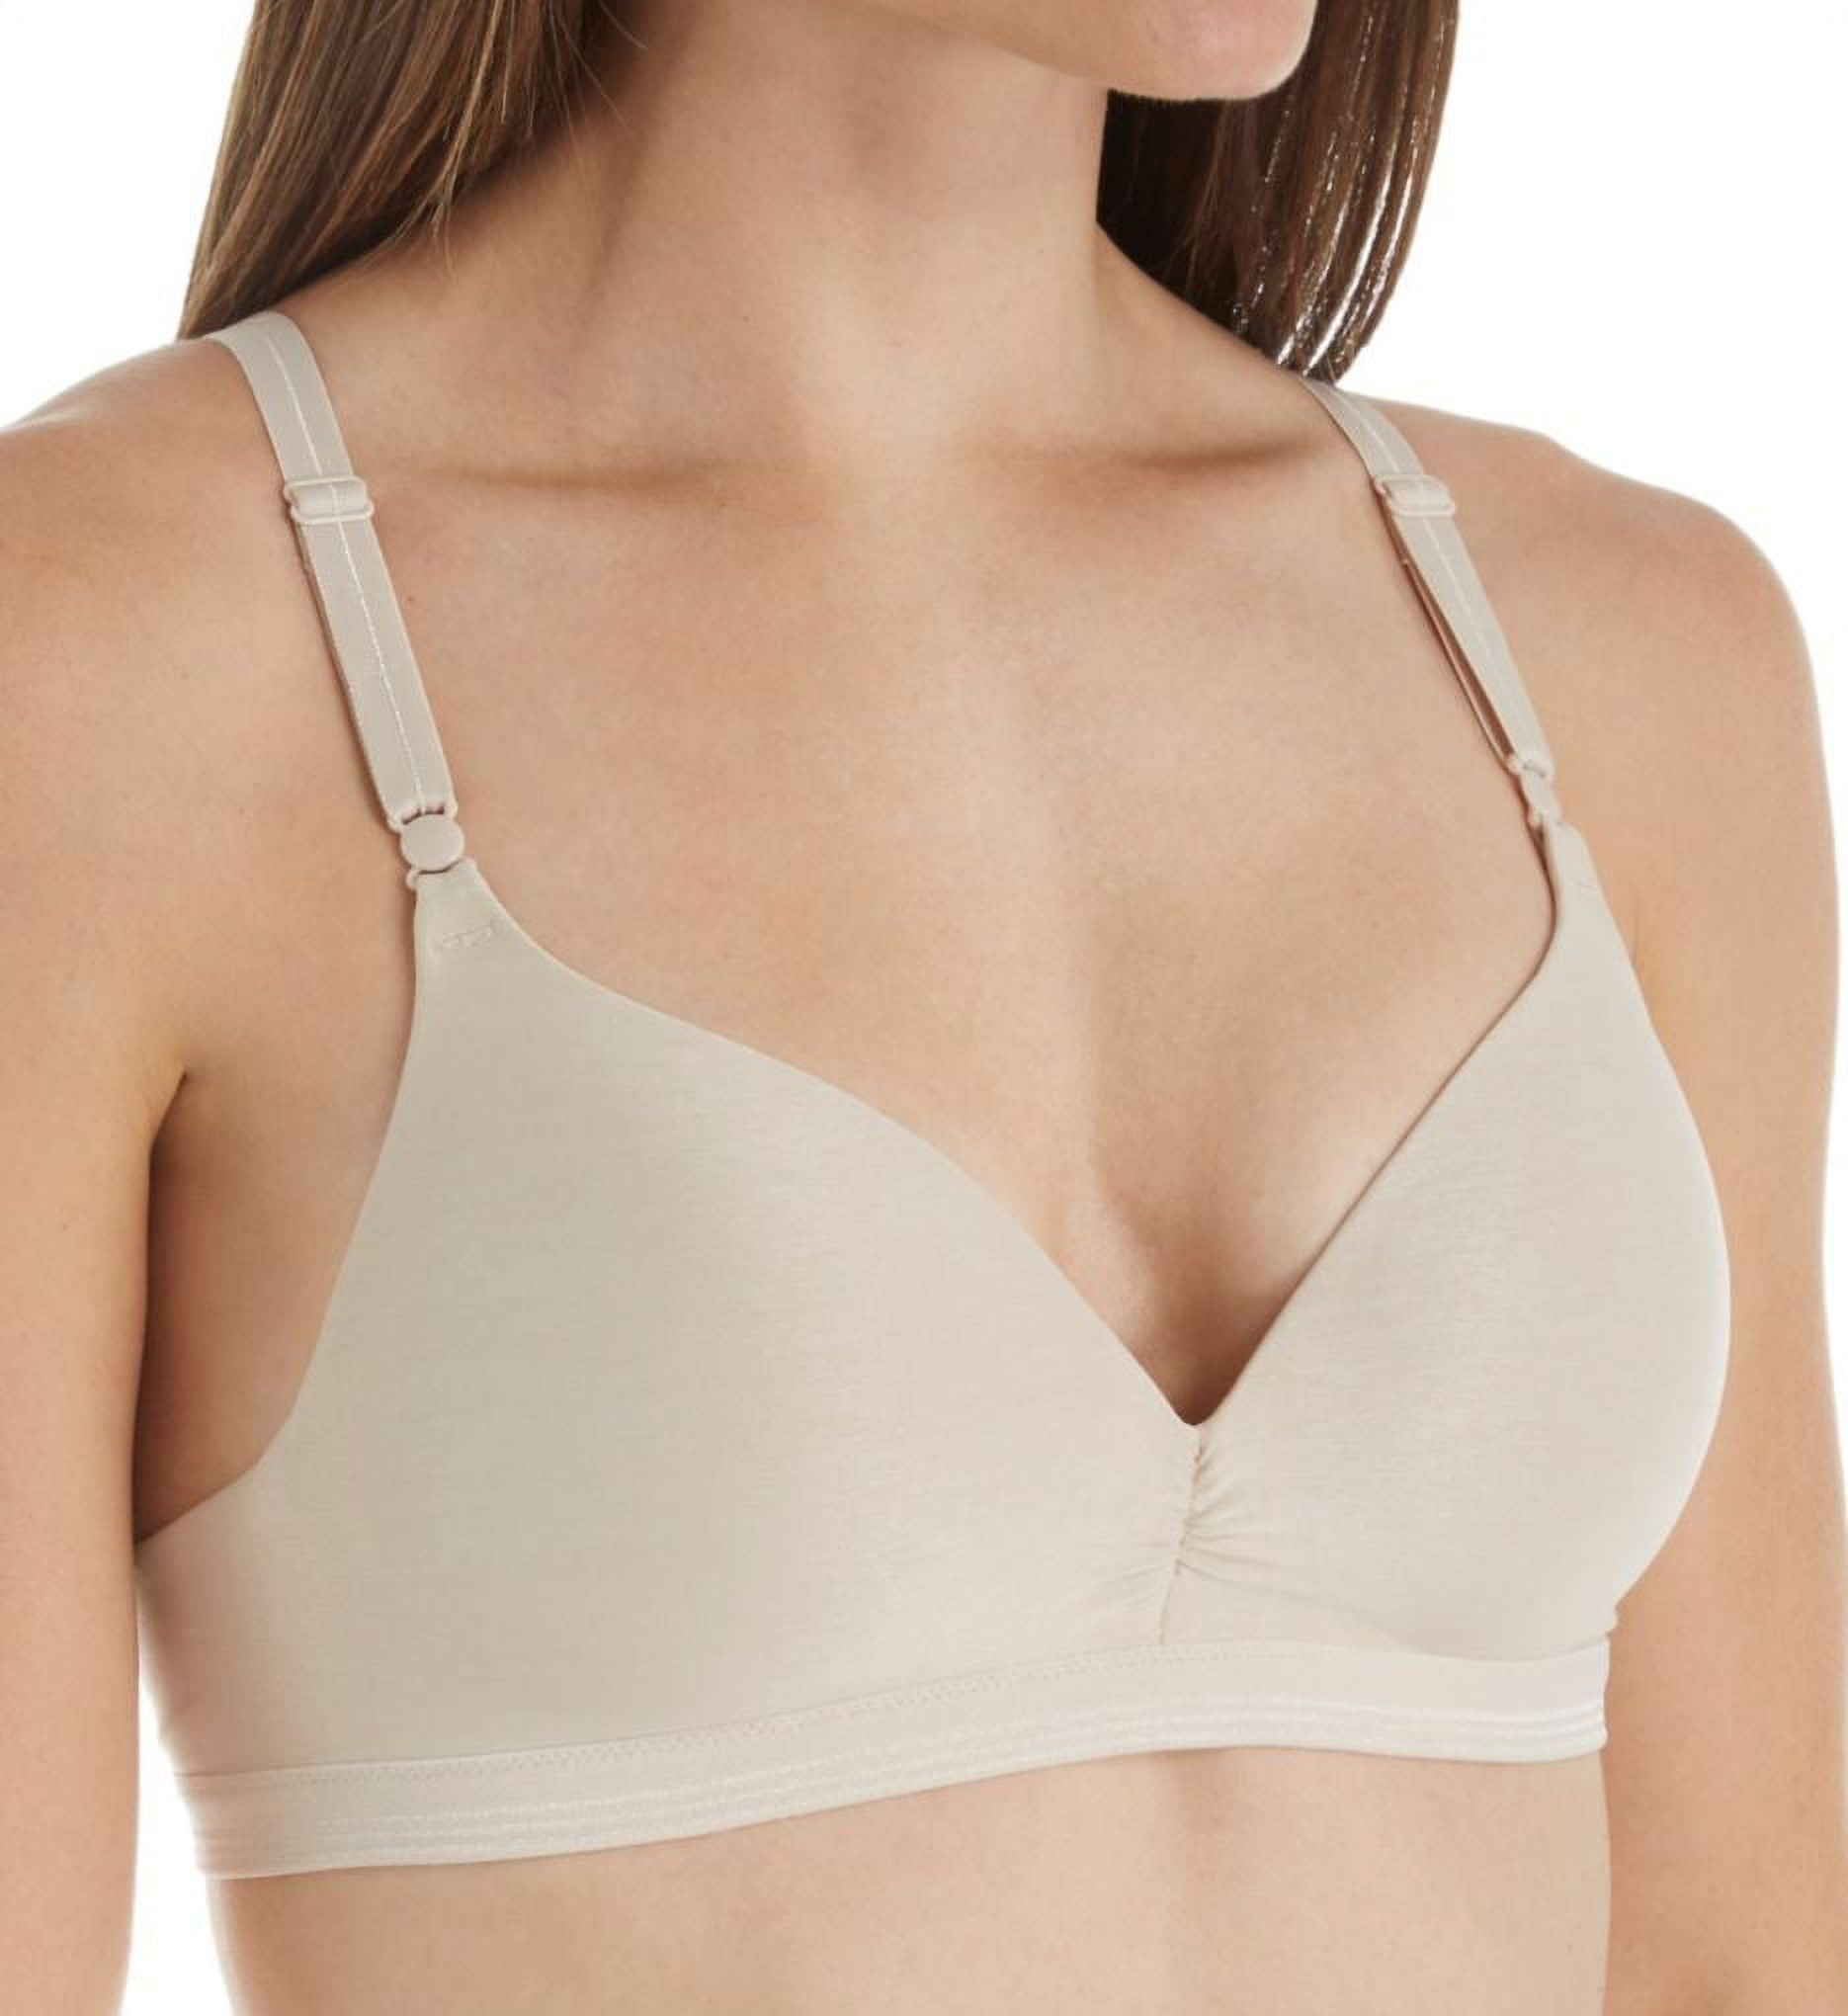 Warner's Women's Back to Smooth Wire-Free Lift Bra, White, 36D